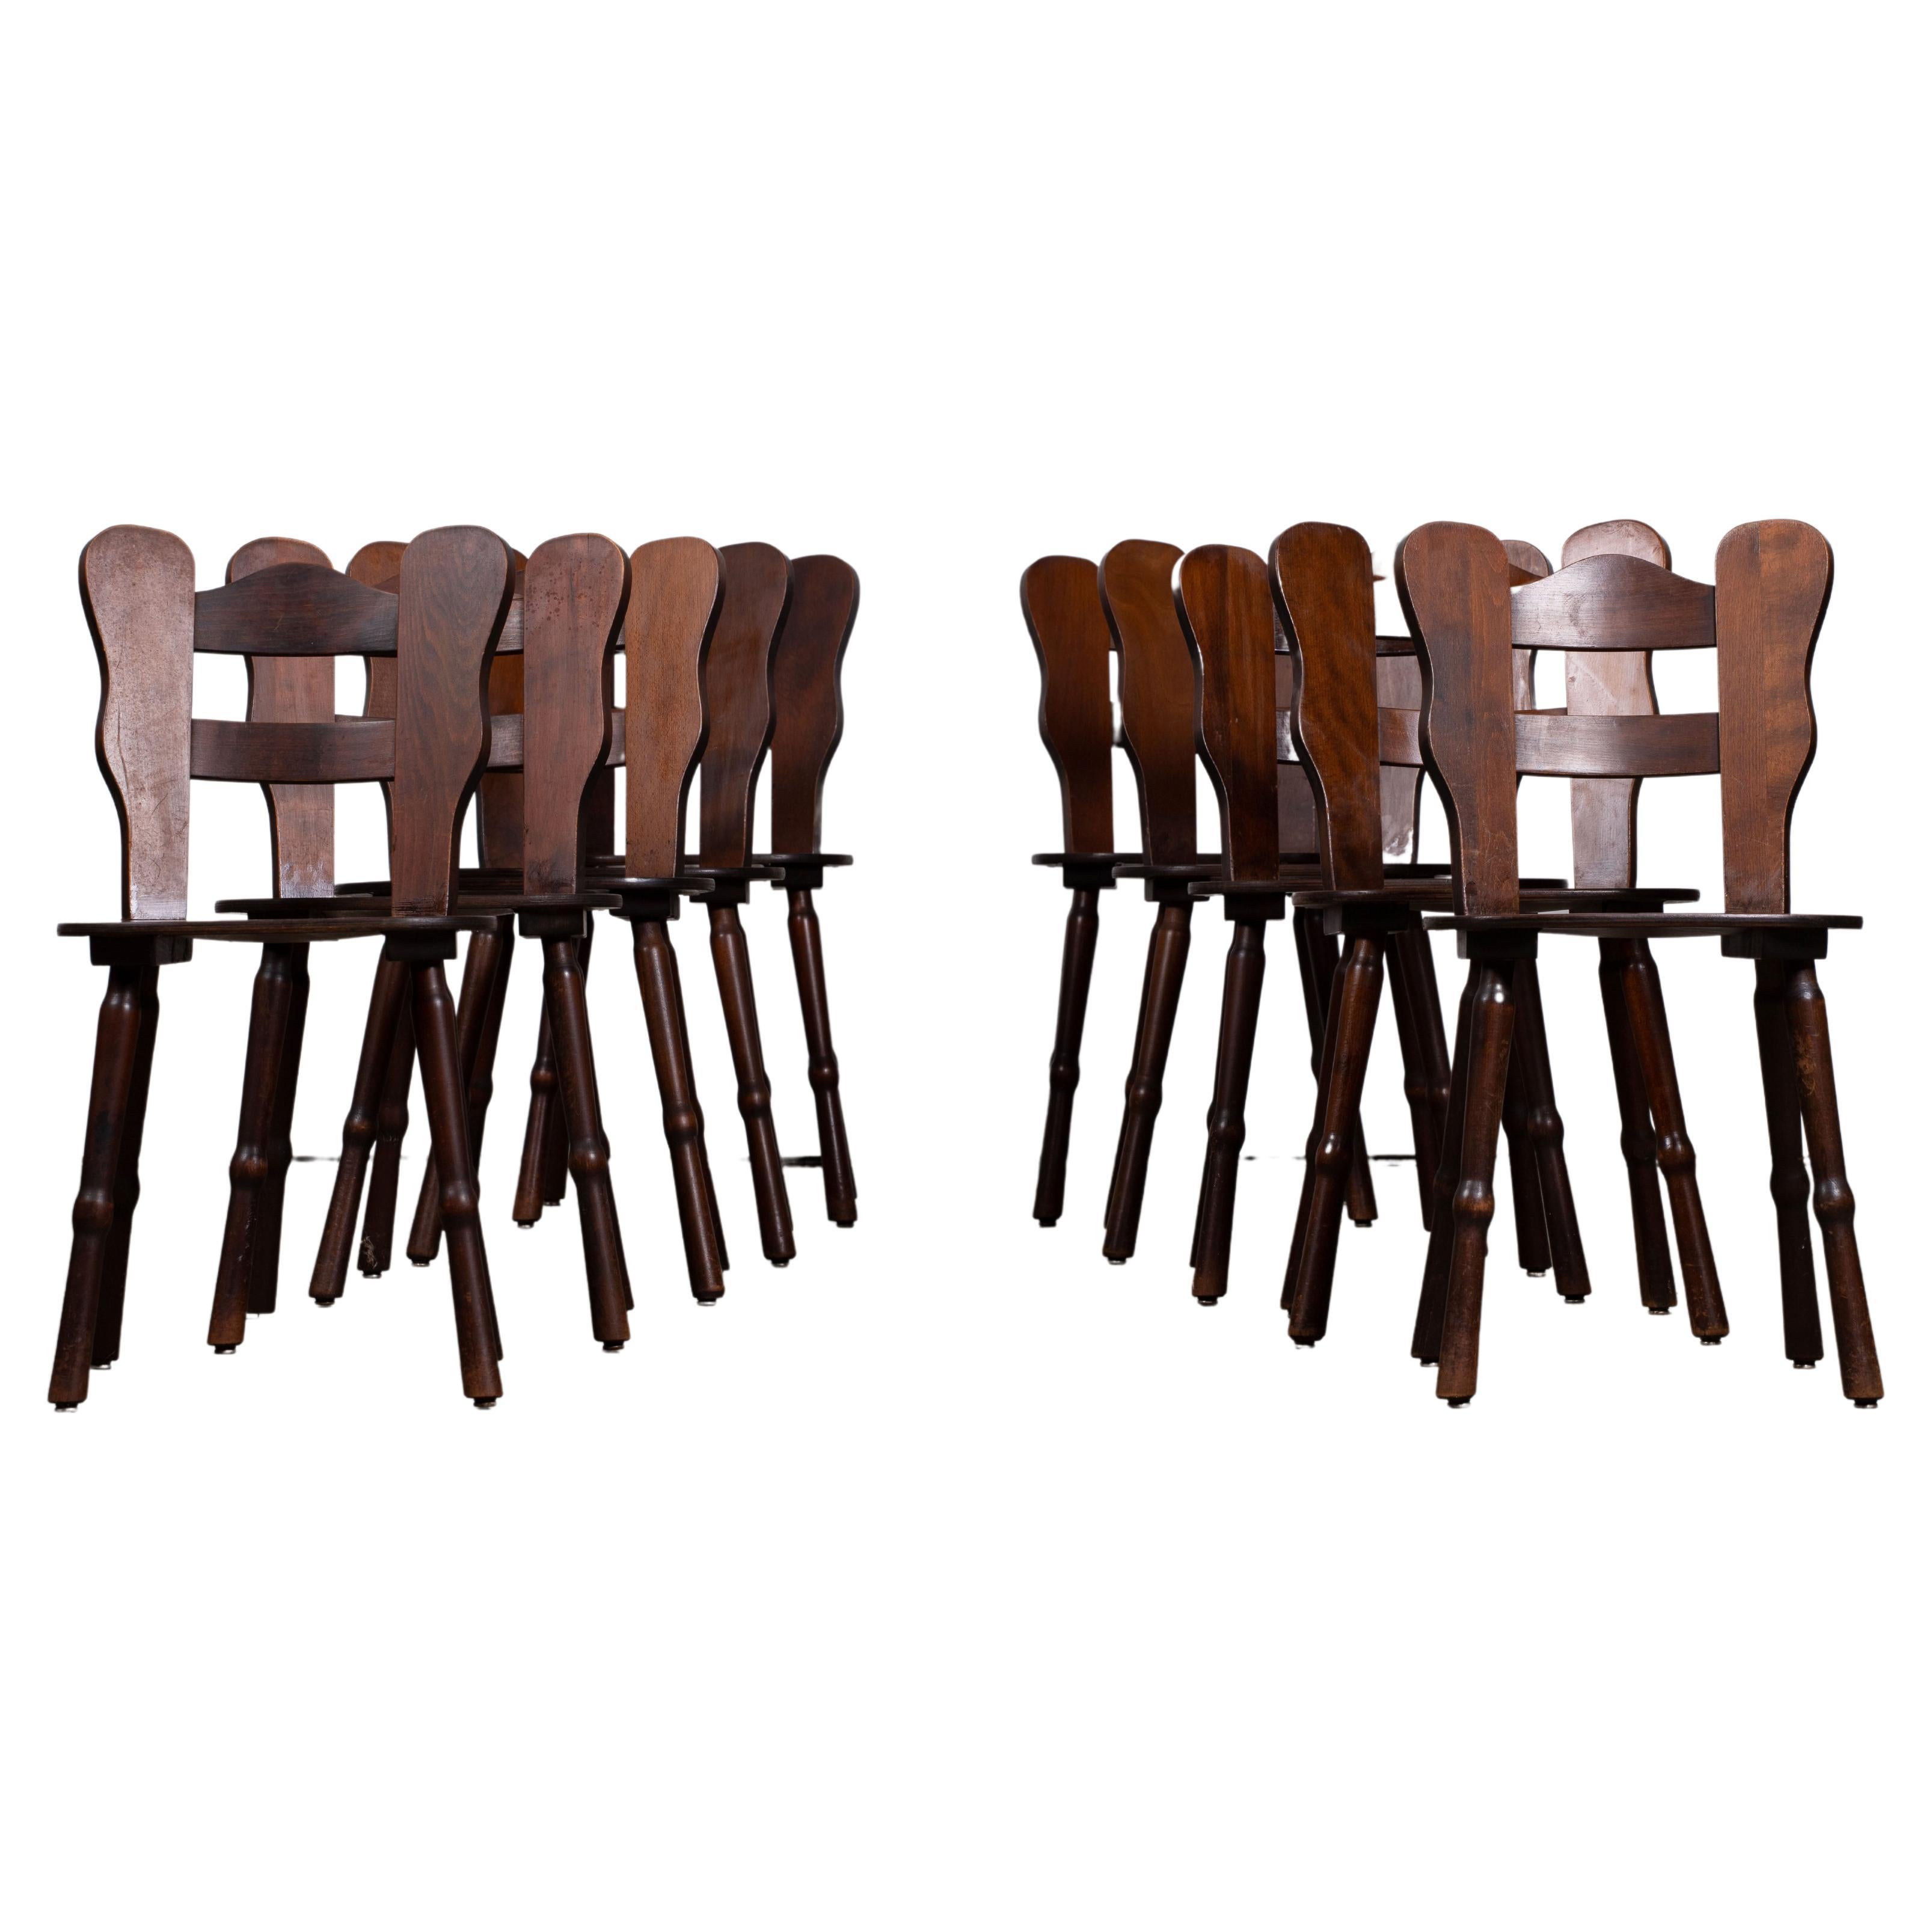 This set of six French Brutalist dining chairs in solid oak was created in the 1940s.

